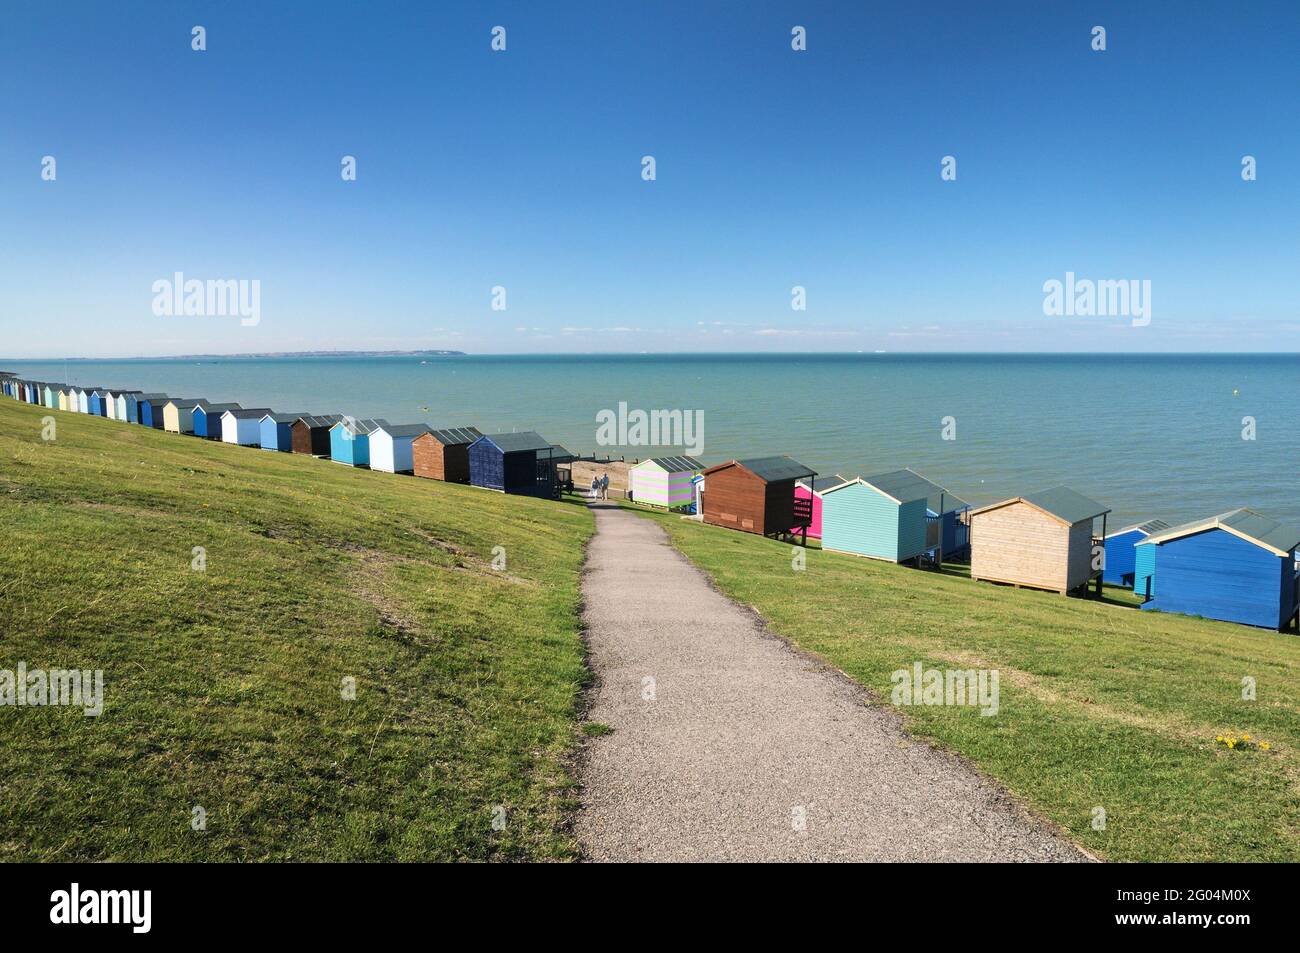 A row of colourful beach huts along the grassy banks of Tankerton Slopes overlooking the beach, just outside Whitstable, North Kent coast, England, UK Stock Photo